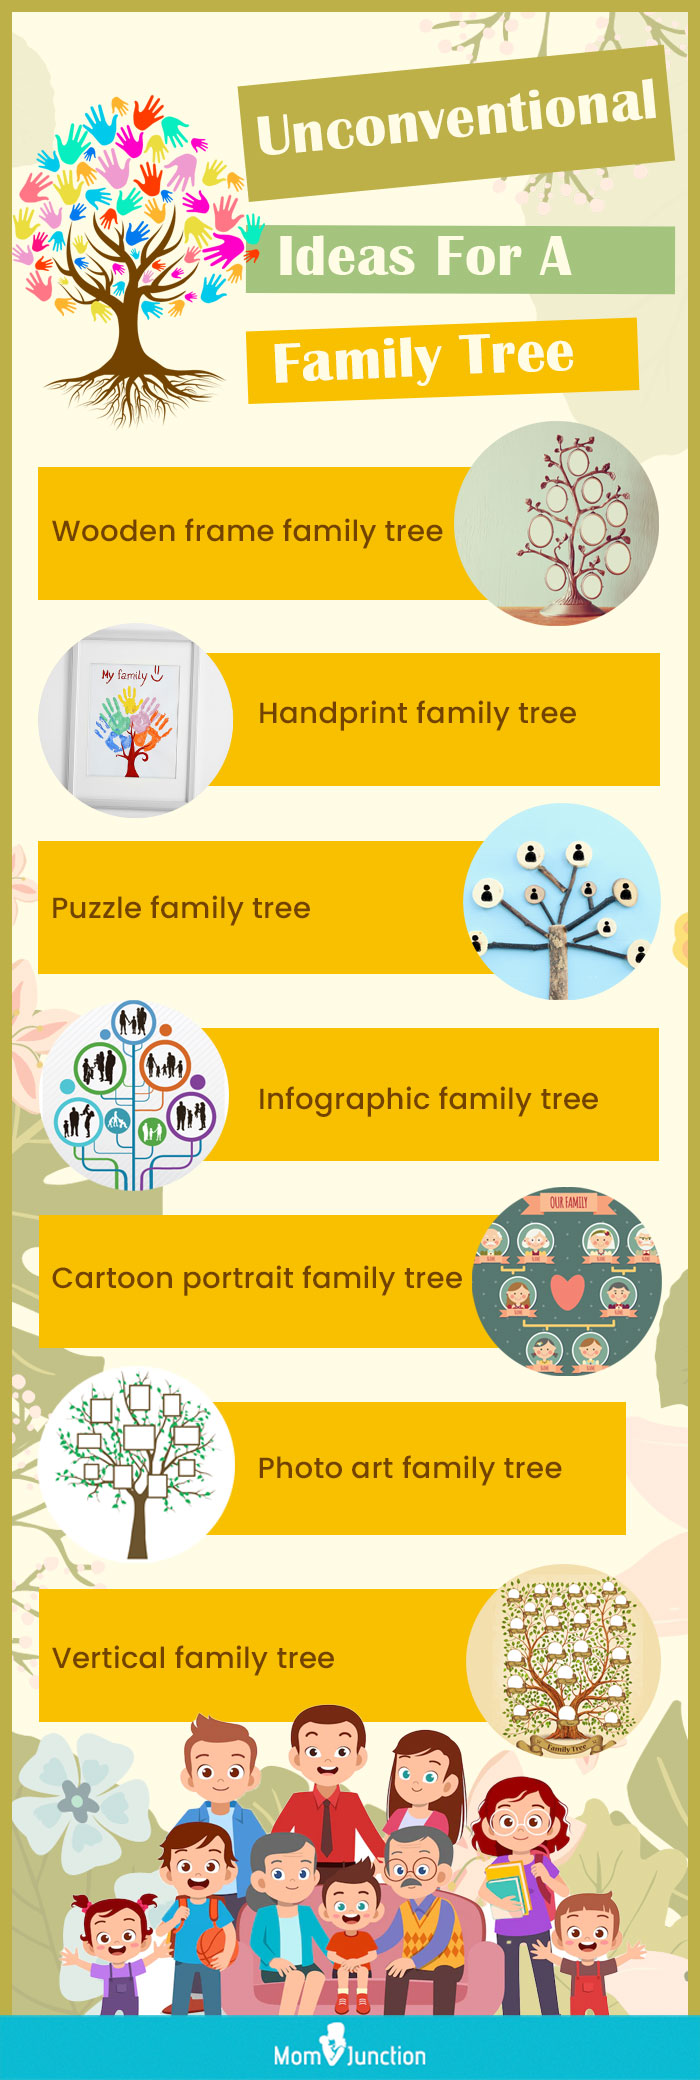 unconventional ideas for a family tree (infographic)